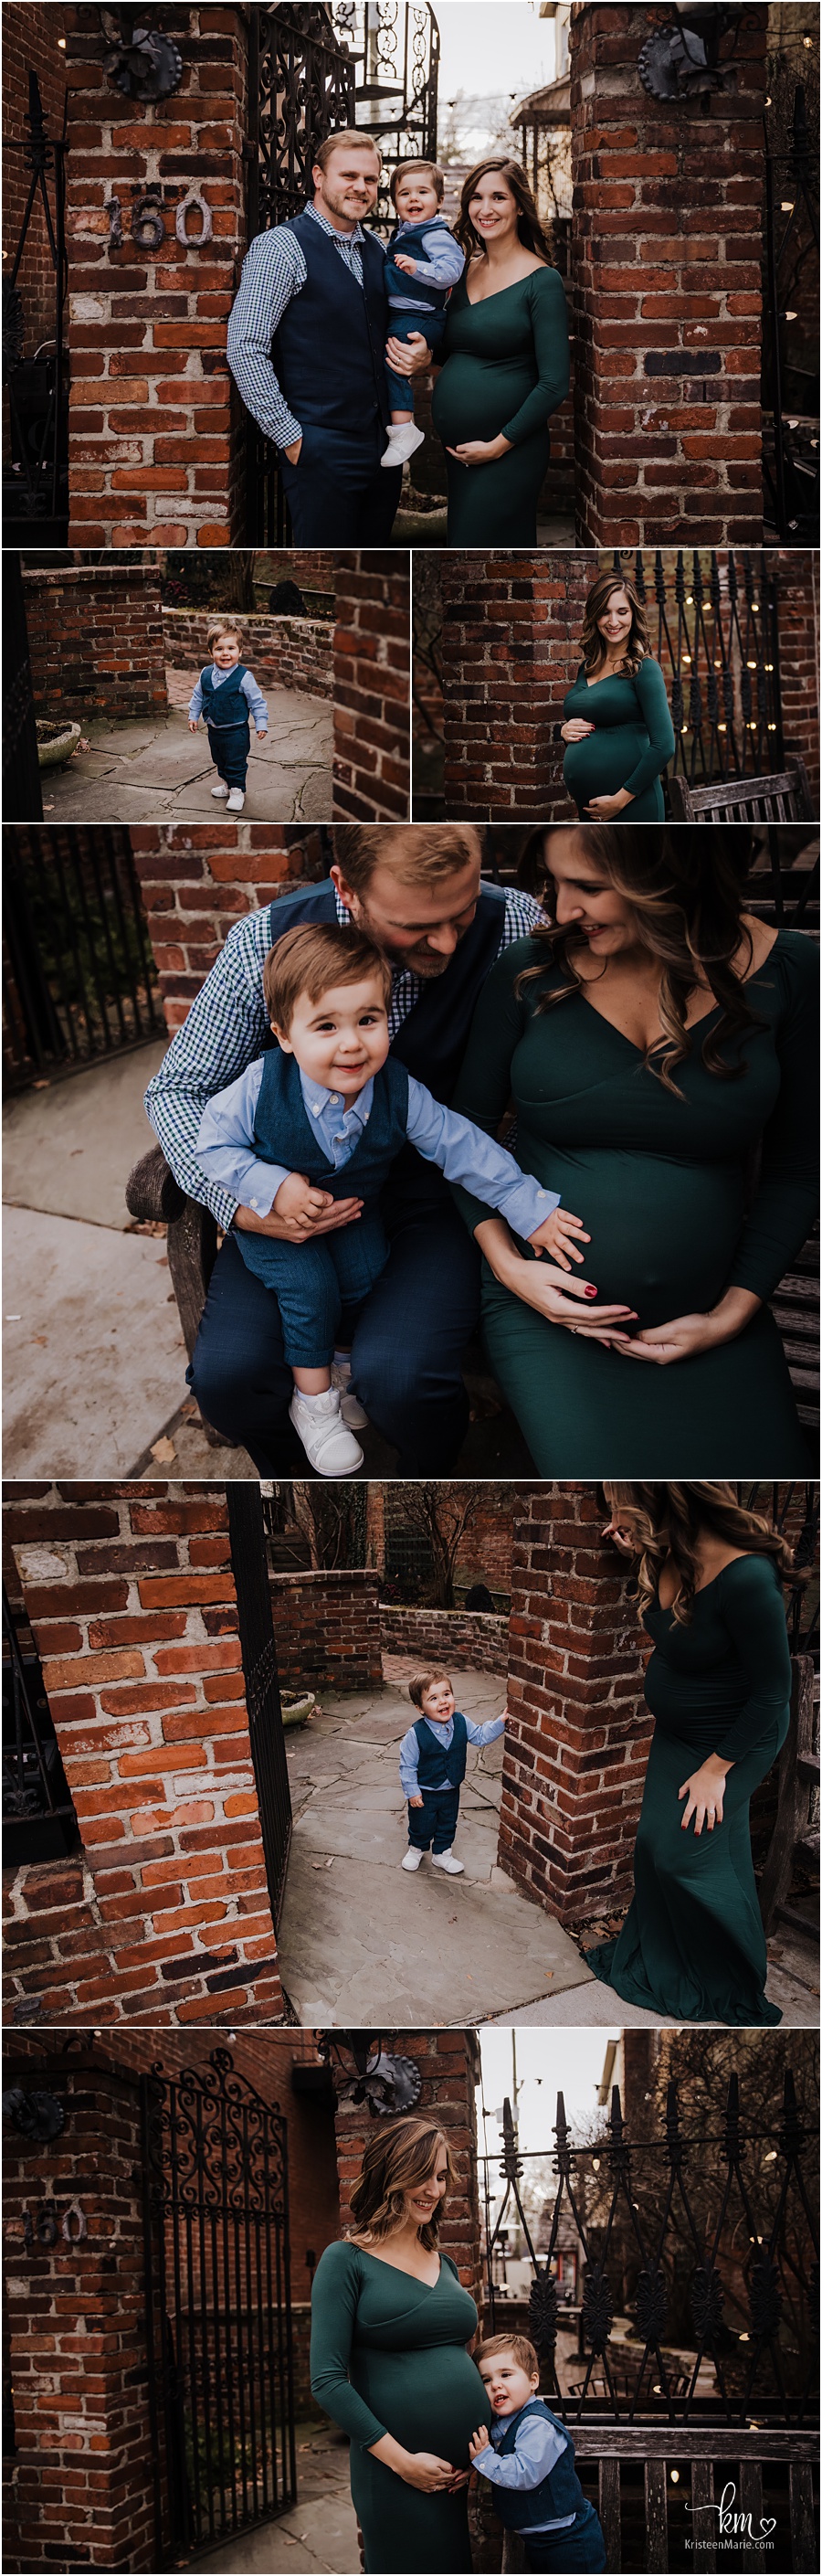 Family doing maternity pictures in urban brick location with green dress